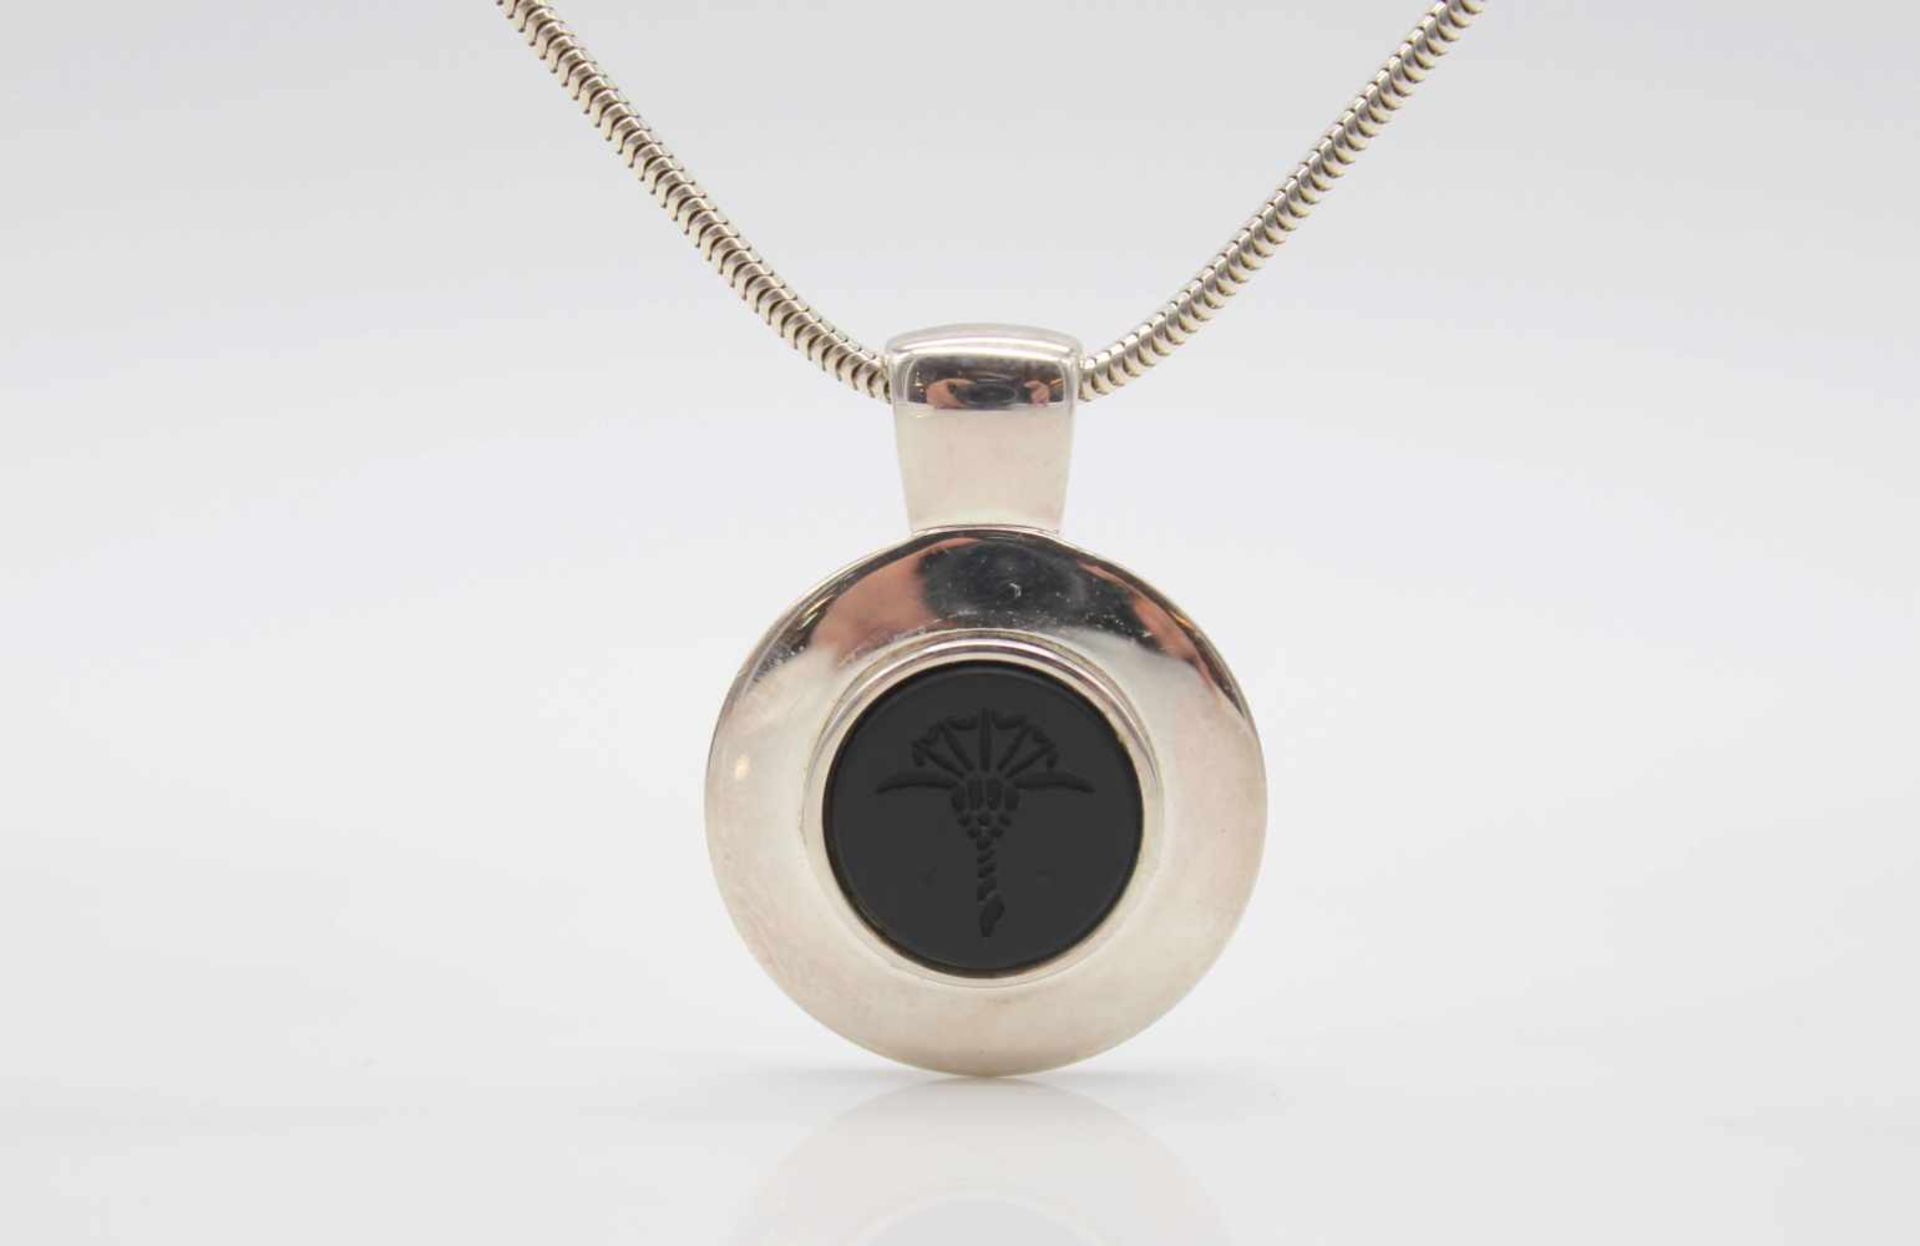 Necklace with a pendant by Joop made of 925 silver and an onyx.Weight 23 g, chain length 42 cm,